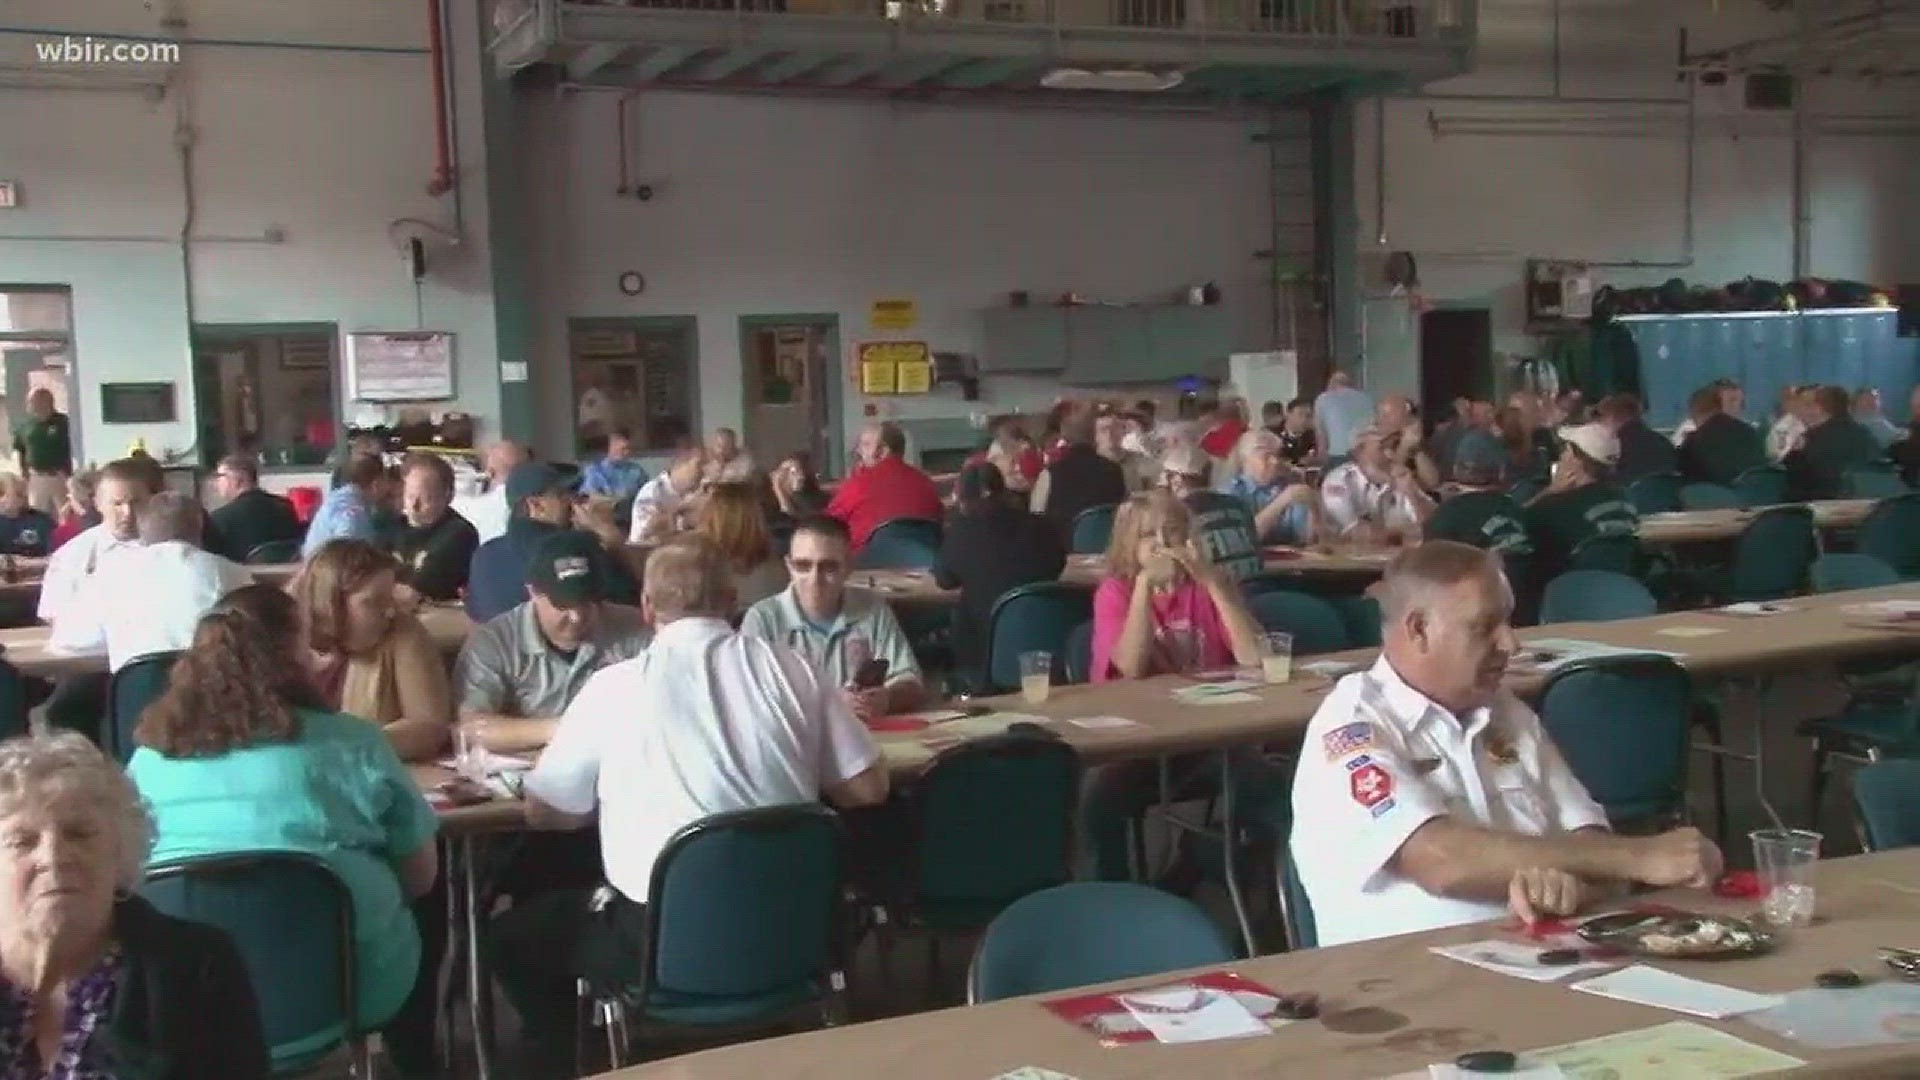 Last November, hundreds of emergency crews from across the state worked to save lives and property during the wildfires. They gathered for a reunion lunch on Tuesday.